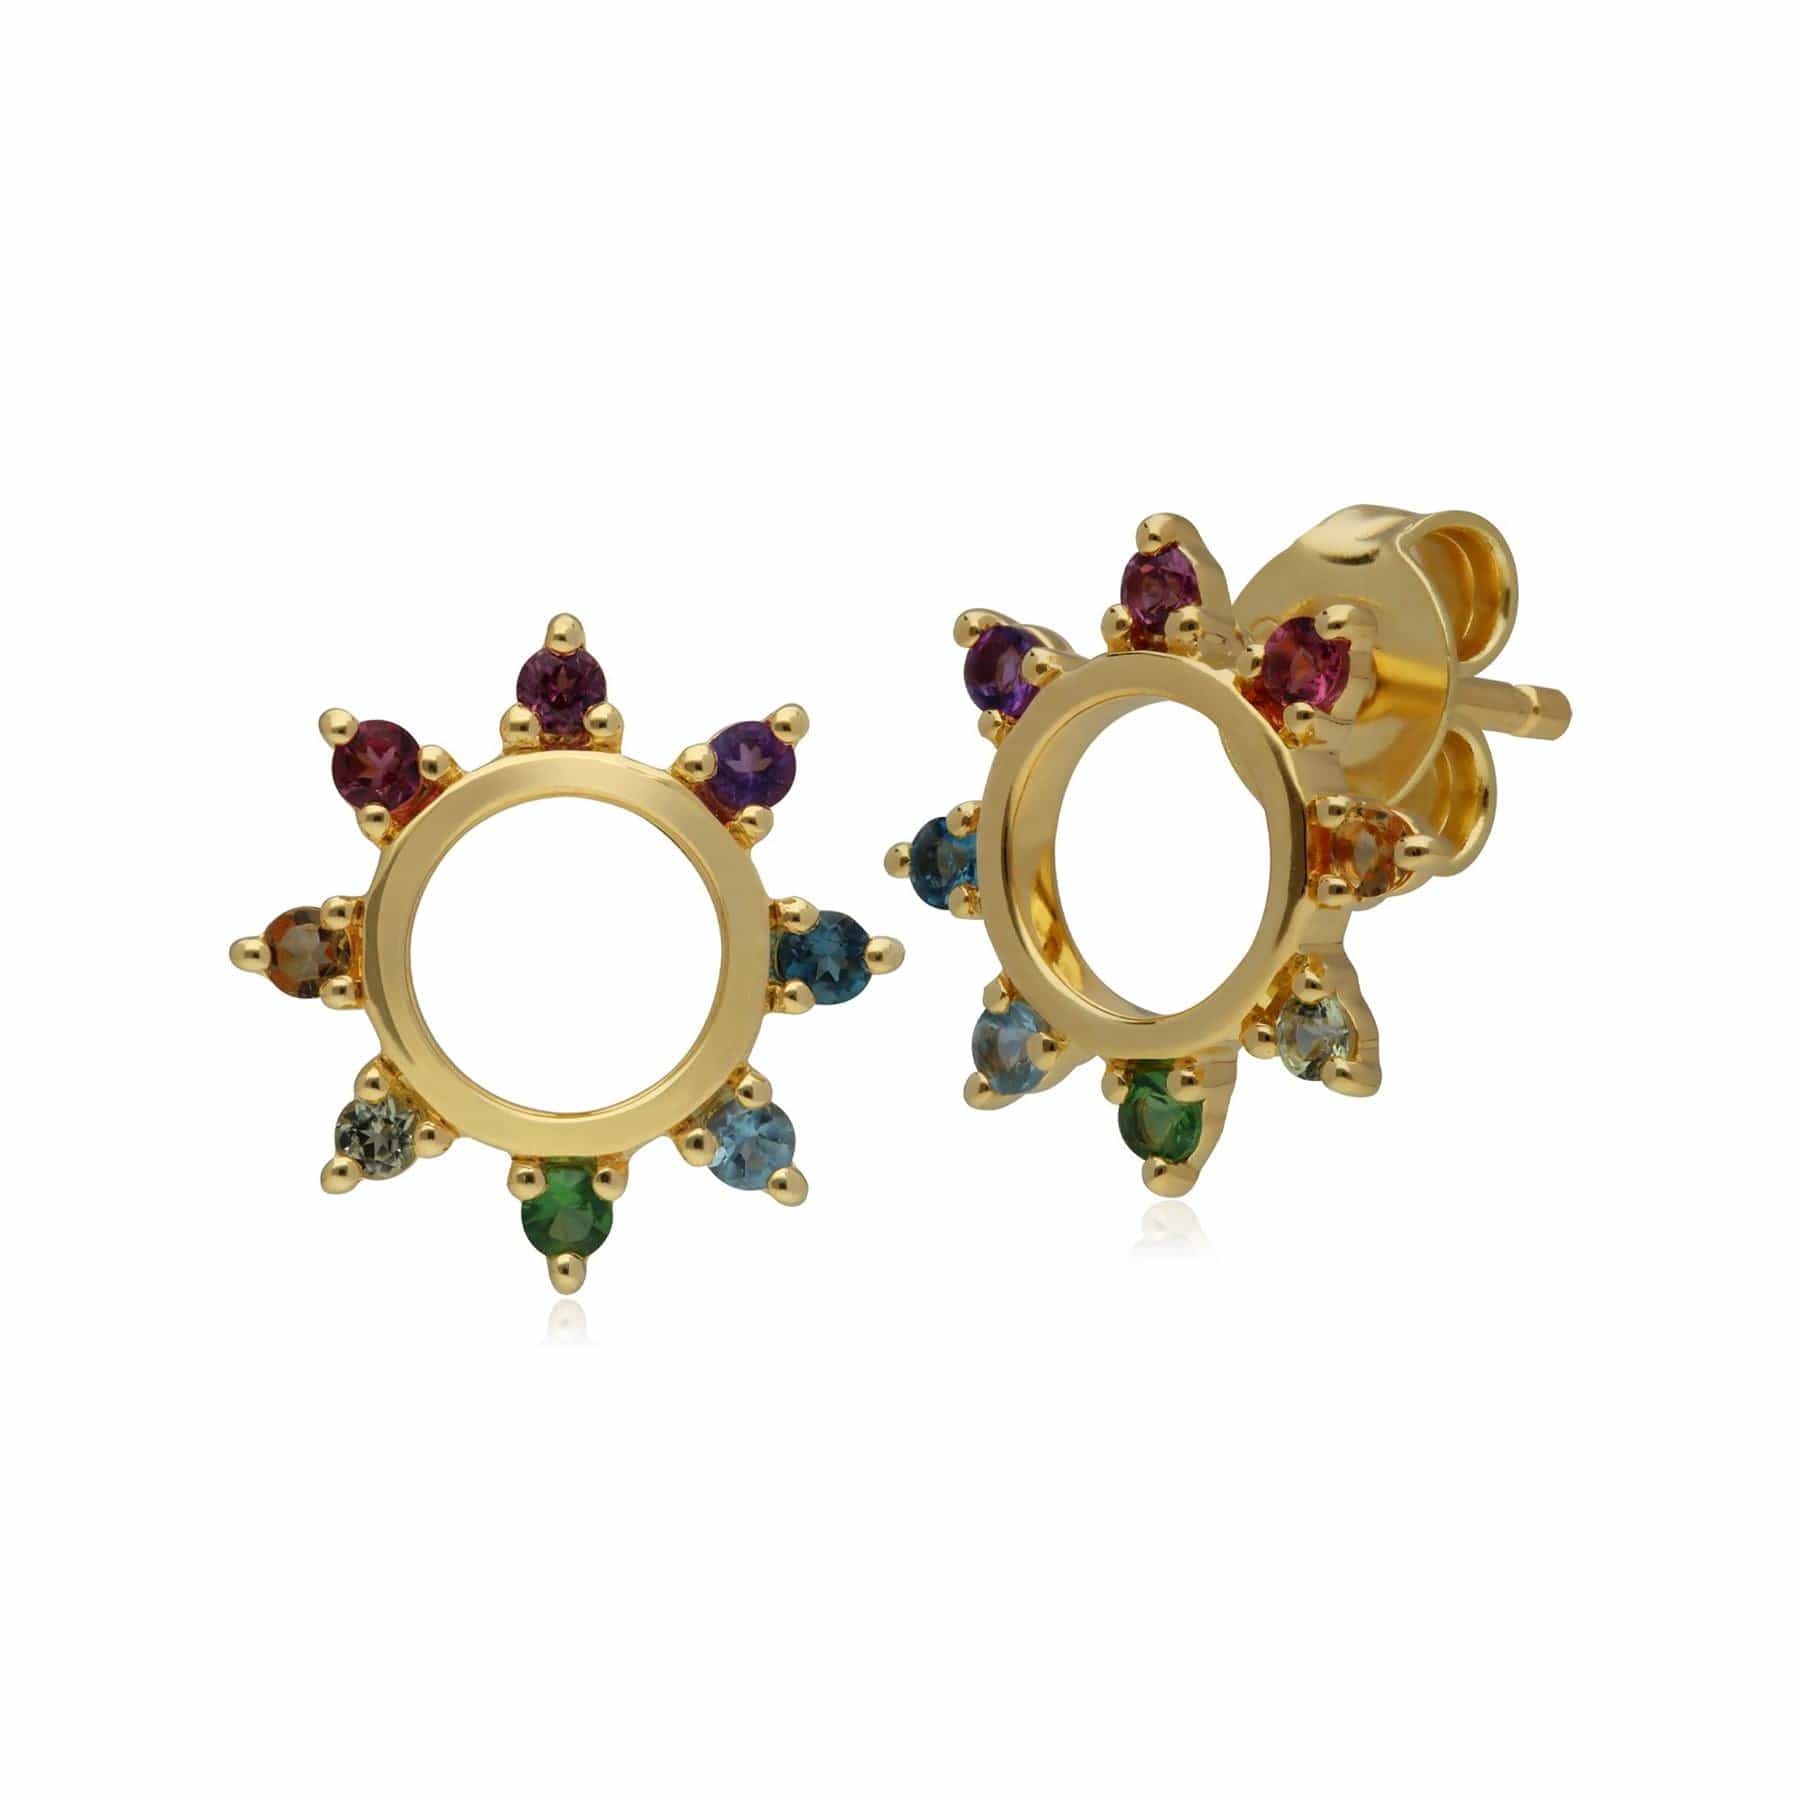 Image of Rainbow Sunburst Stud Earrings in Gold Plated Sterling Silver